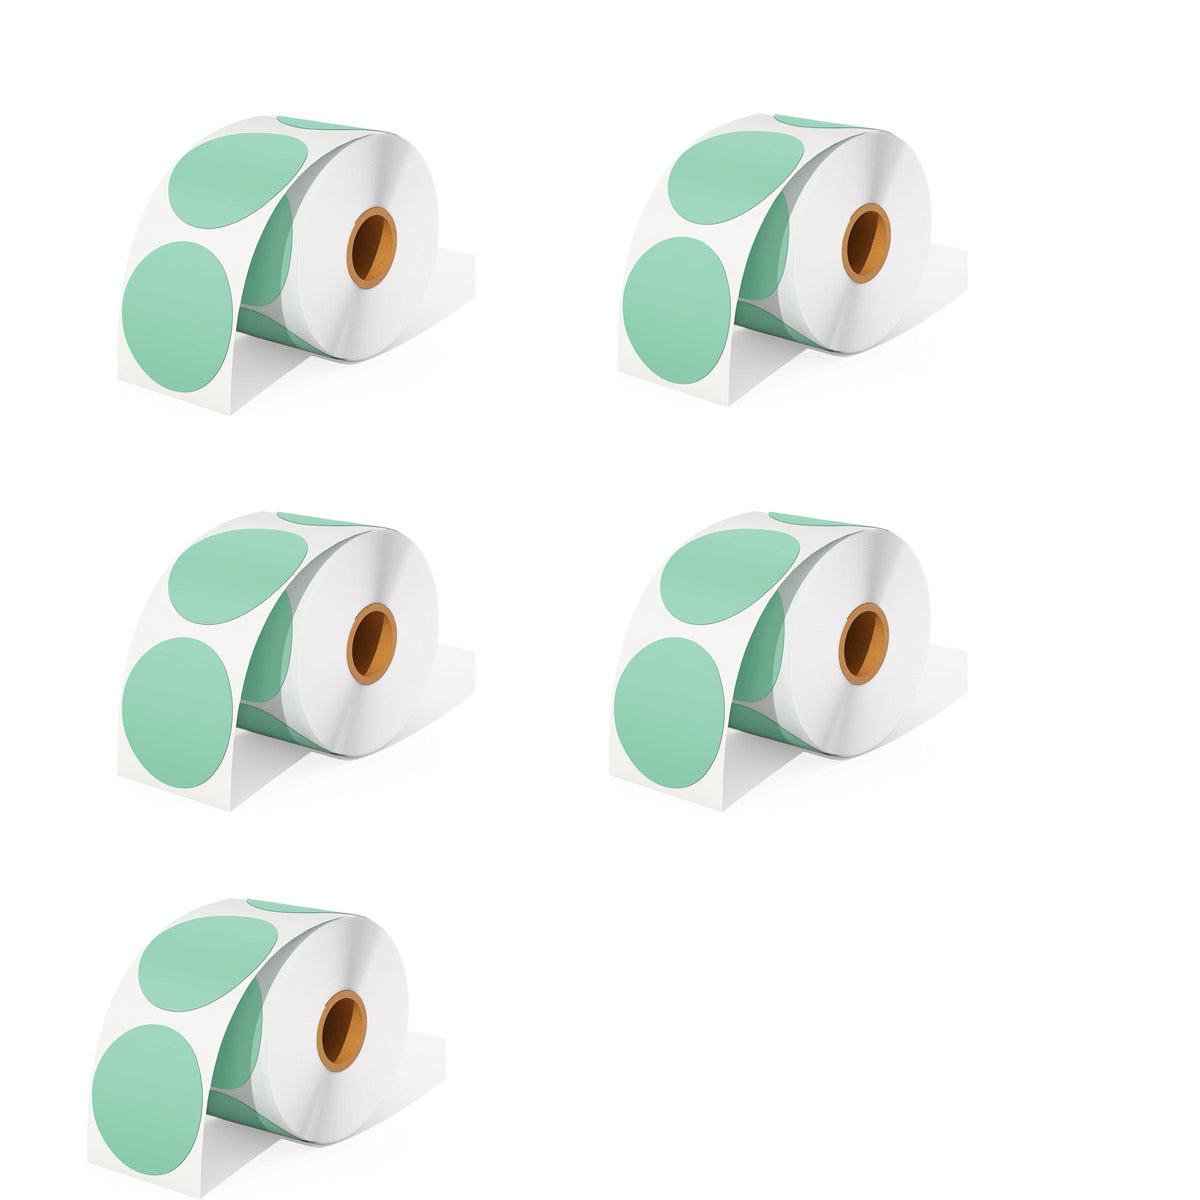 MUNBYN offers five rolls of green direct thermal round labels as a kit, with 750 labels per roll.